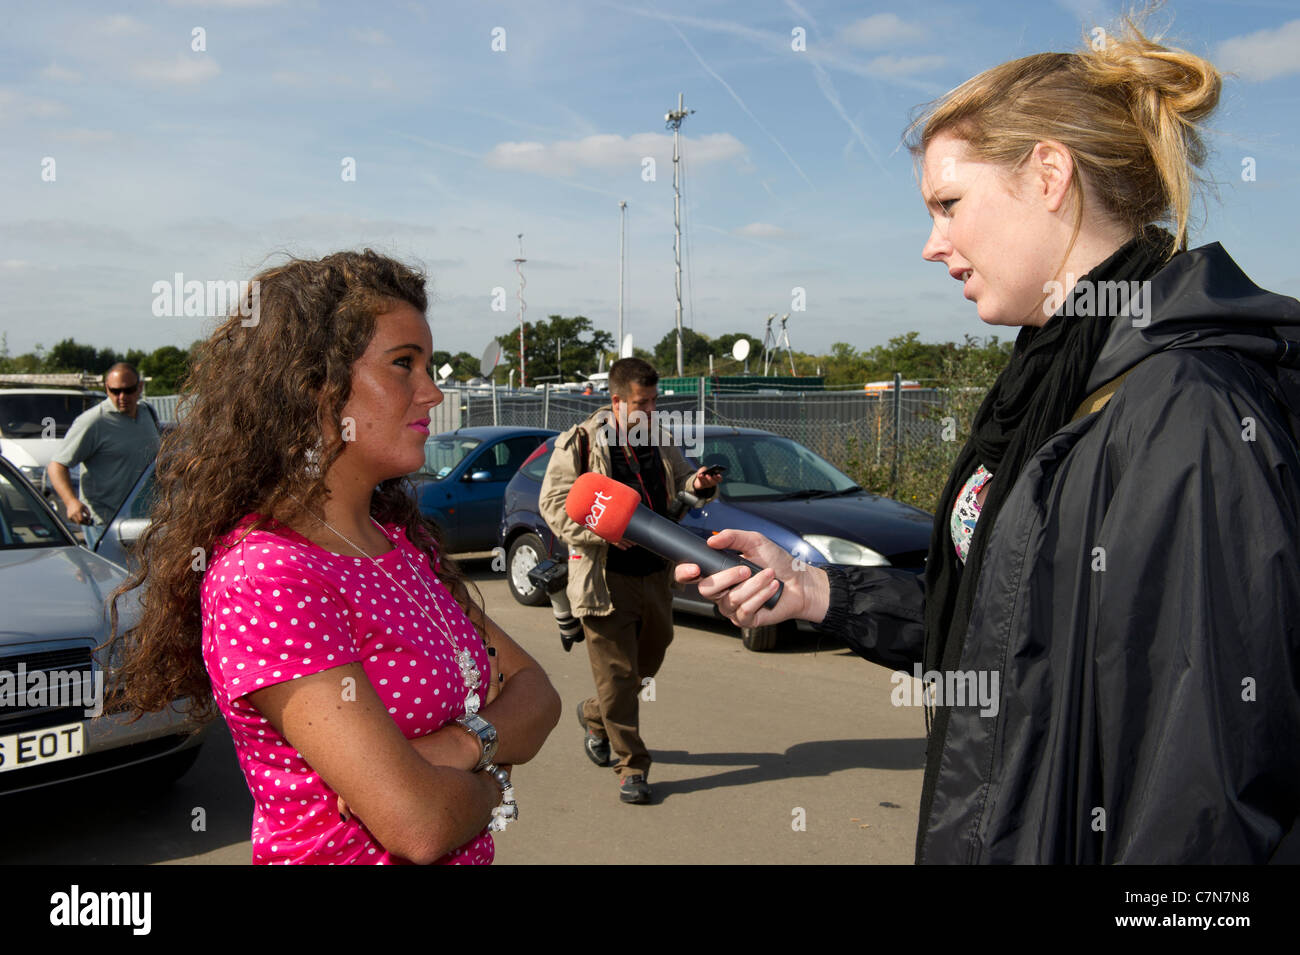 Dale Farm eviction. Young traveller girl interviewed about impending eviction of the largest illegal traveller site in the UK. Stock Photo